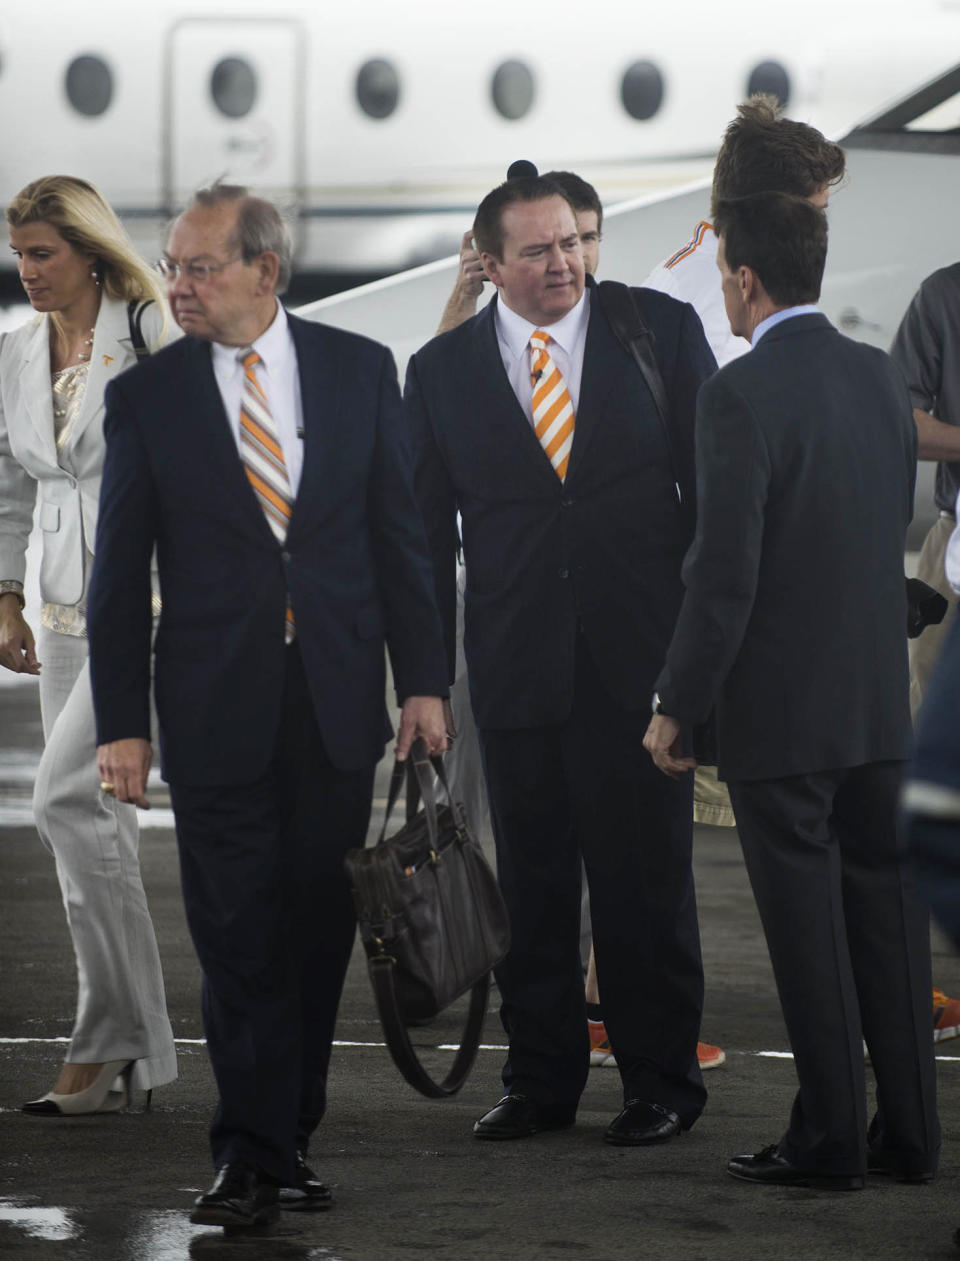 Tennessee men's basketball coach Donnie Tyndall, center, talks to athletic director Dave Hart after Tyndall arrived Tuesday, April 22, 2014, in Knoxville, Tenn. At left are Tyndall's fiancee, Nikki Young, and Tennessee chancellor Jimmy Cheek. The former Southern Mississippi coach succeeds Cuonzo Martin, who resigned last week to take the coaching job at California. (AP Photo/Knoxville News Sentinel, Paul Efird)